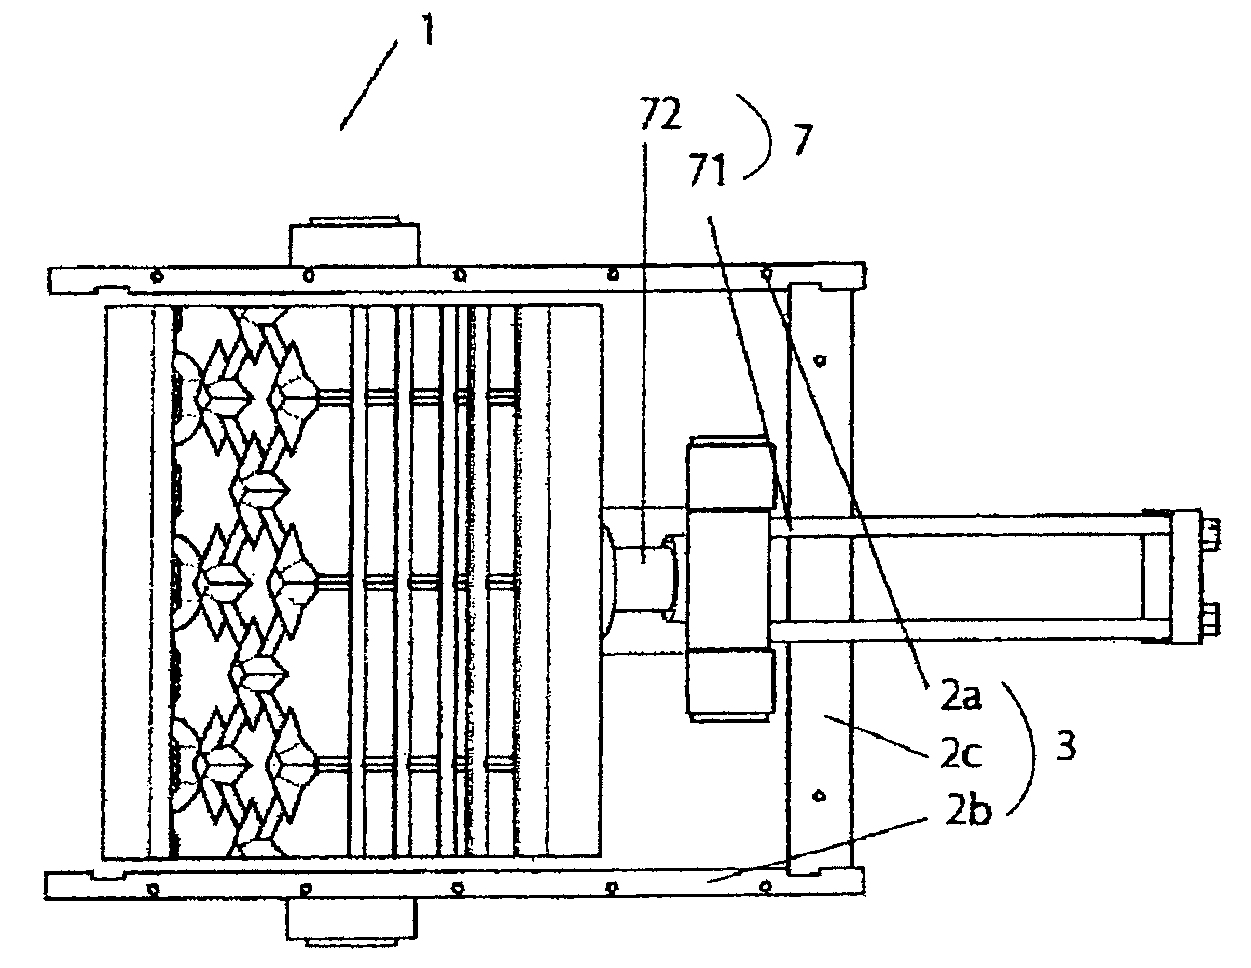 Apparatus for shearing and breaking nonferrous casting